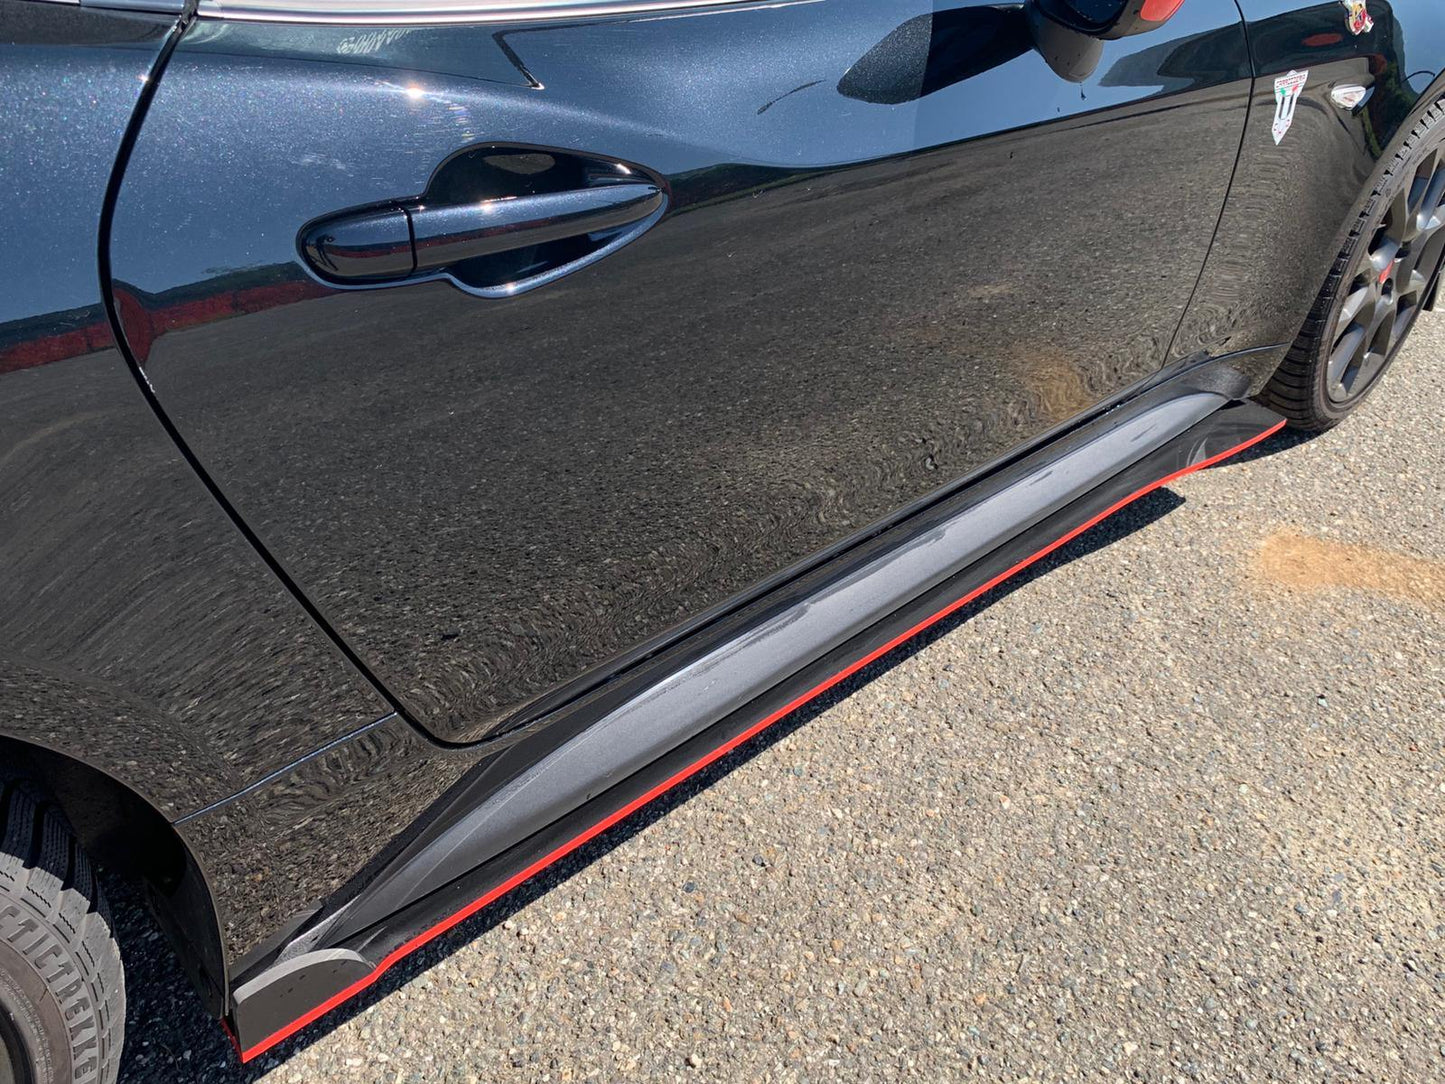 CHD Tuning Side Skirts for Abarth 124 Spider - Abarth Tuning